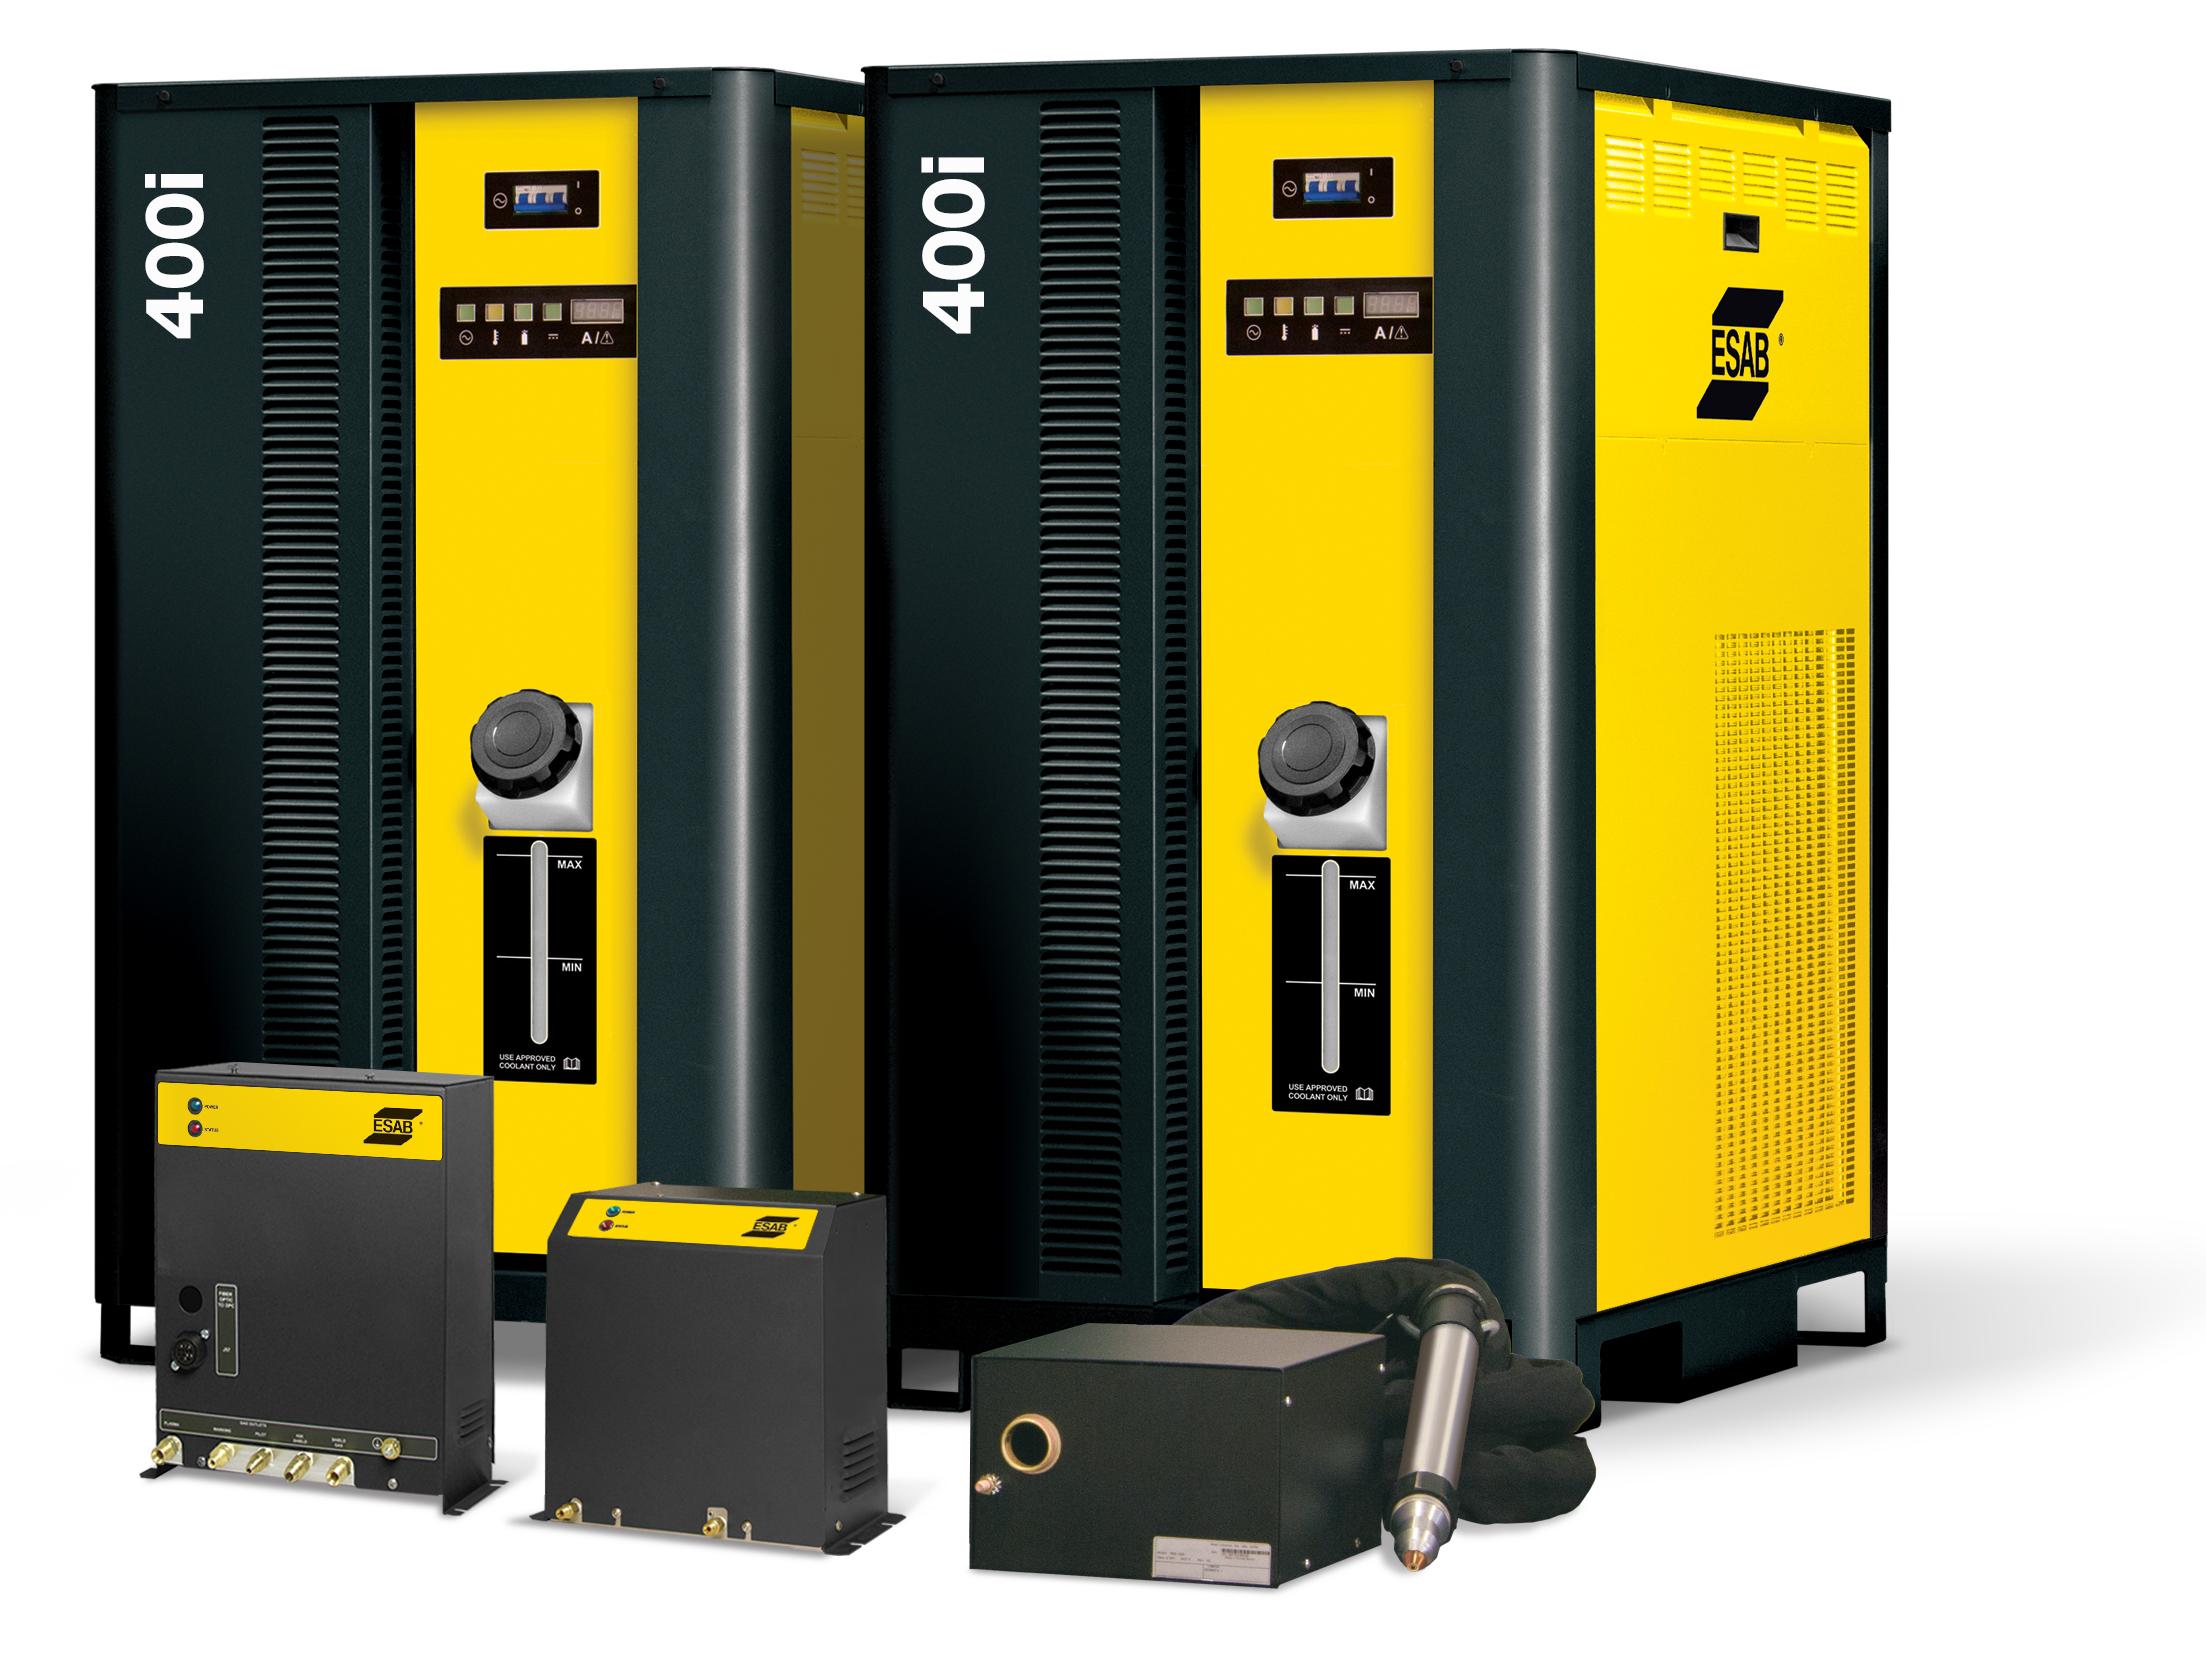 ESAB launches new iSeries automated plasma systems